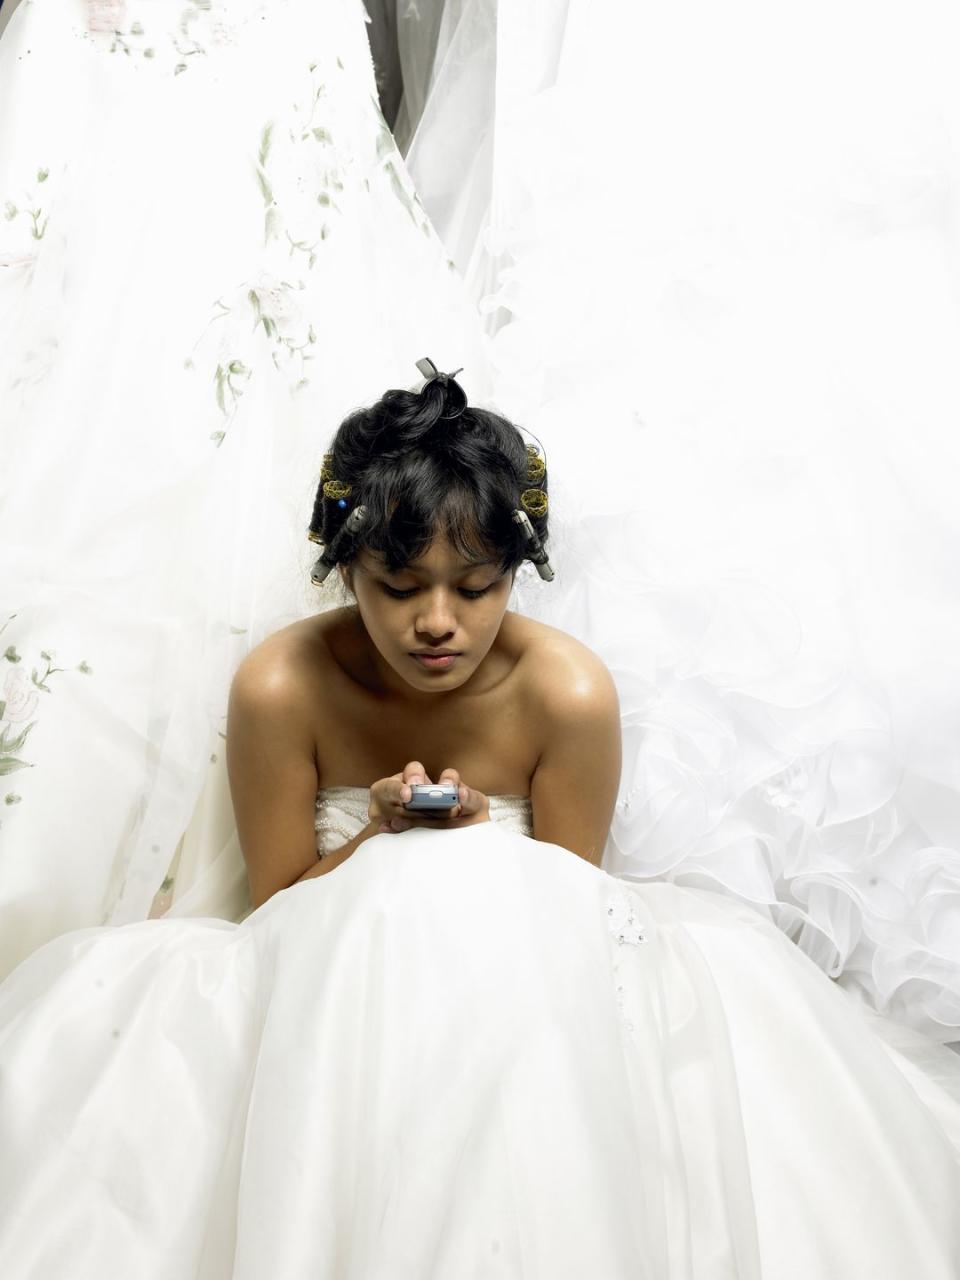 You text the bride or groom on their wedding day.